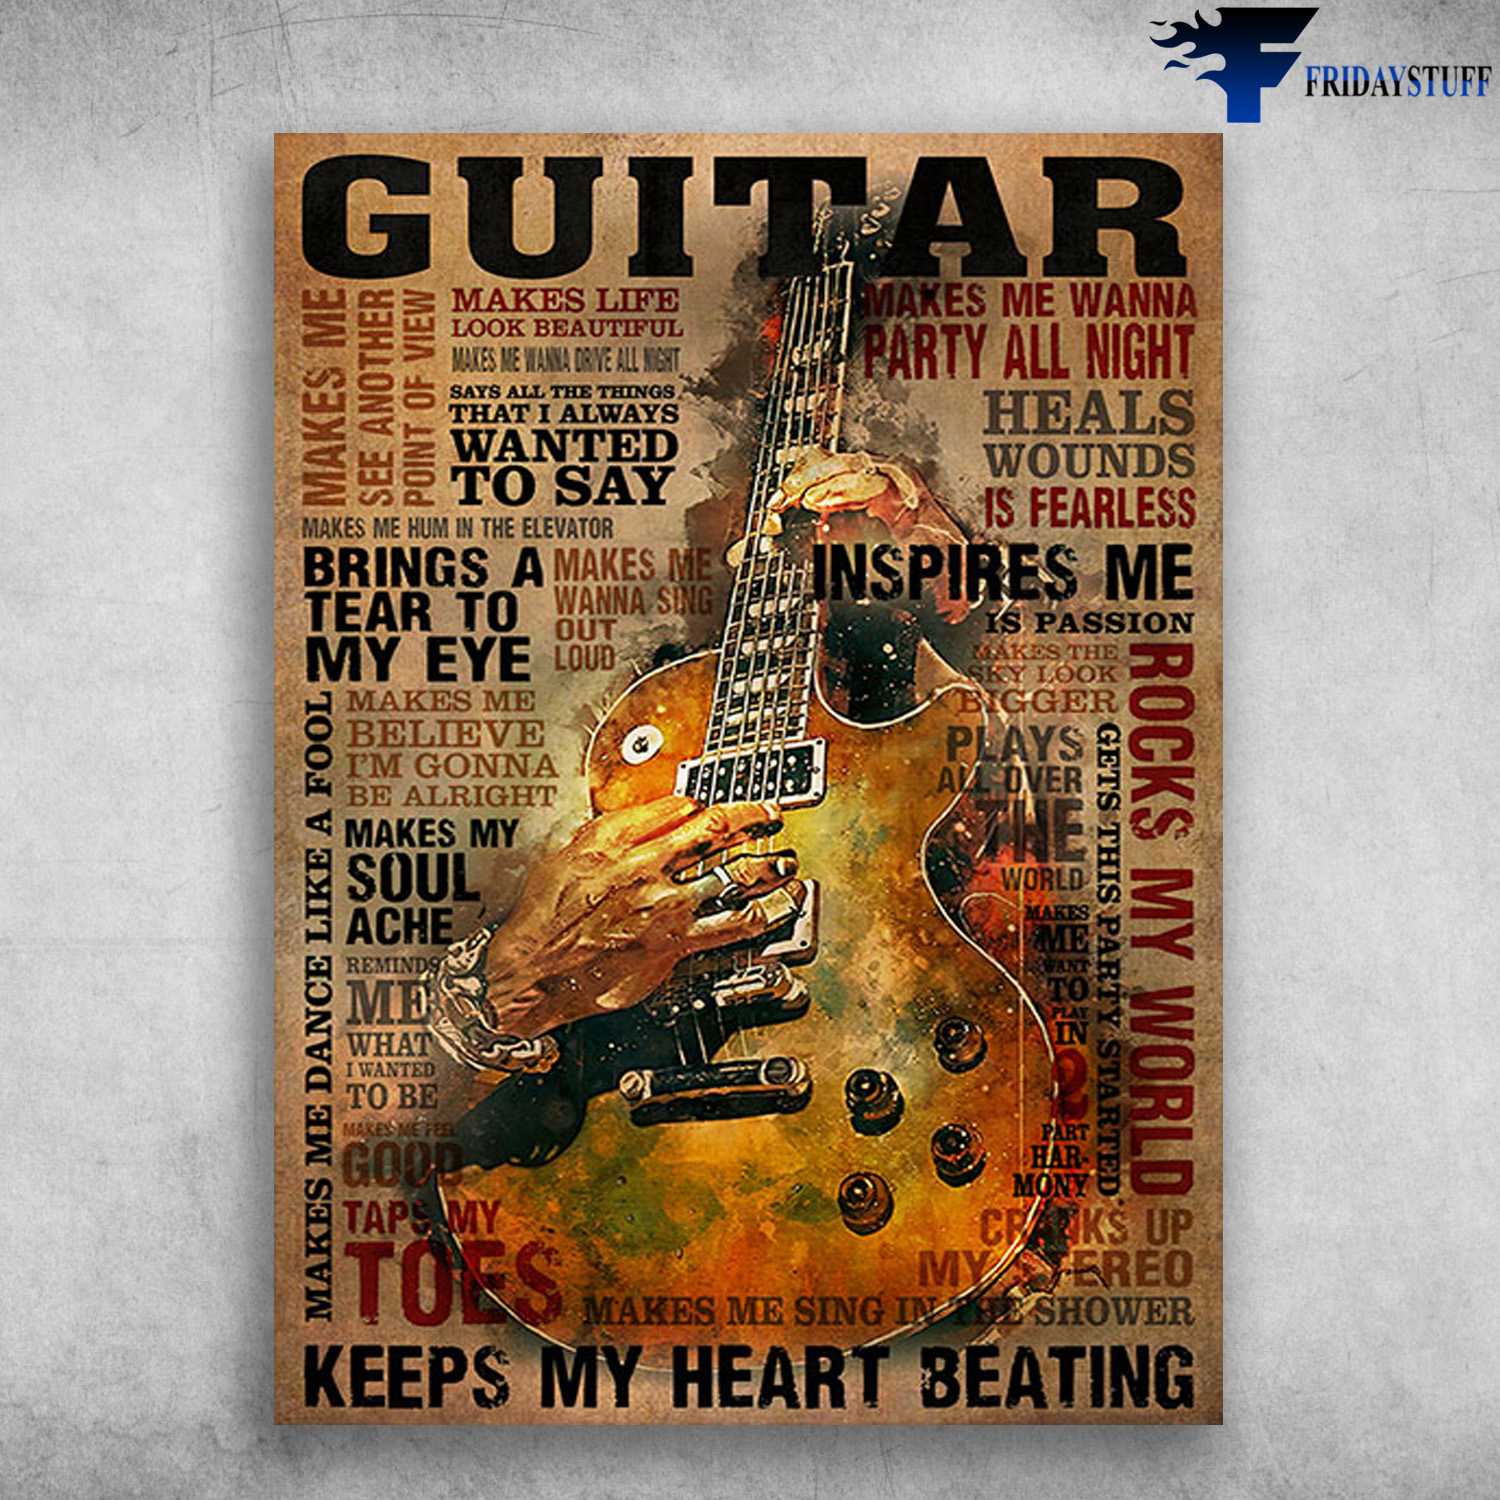 Guitar Lover, Guitar Poster, Guitar Make Me See Another Point Of View, Makes Life Look Beautiful, Make Me Wanna Party All Night, Heals Wounds Is Fearless